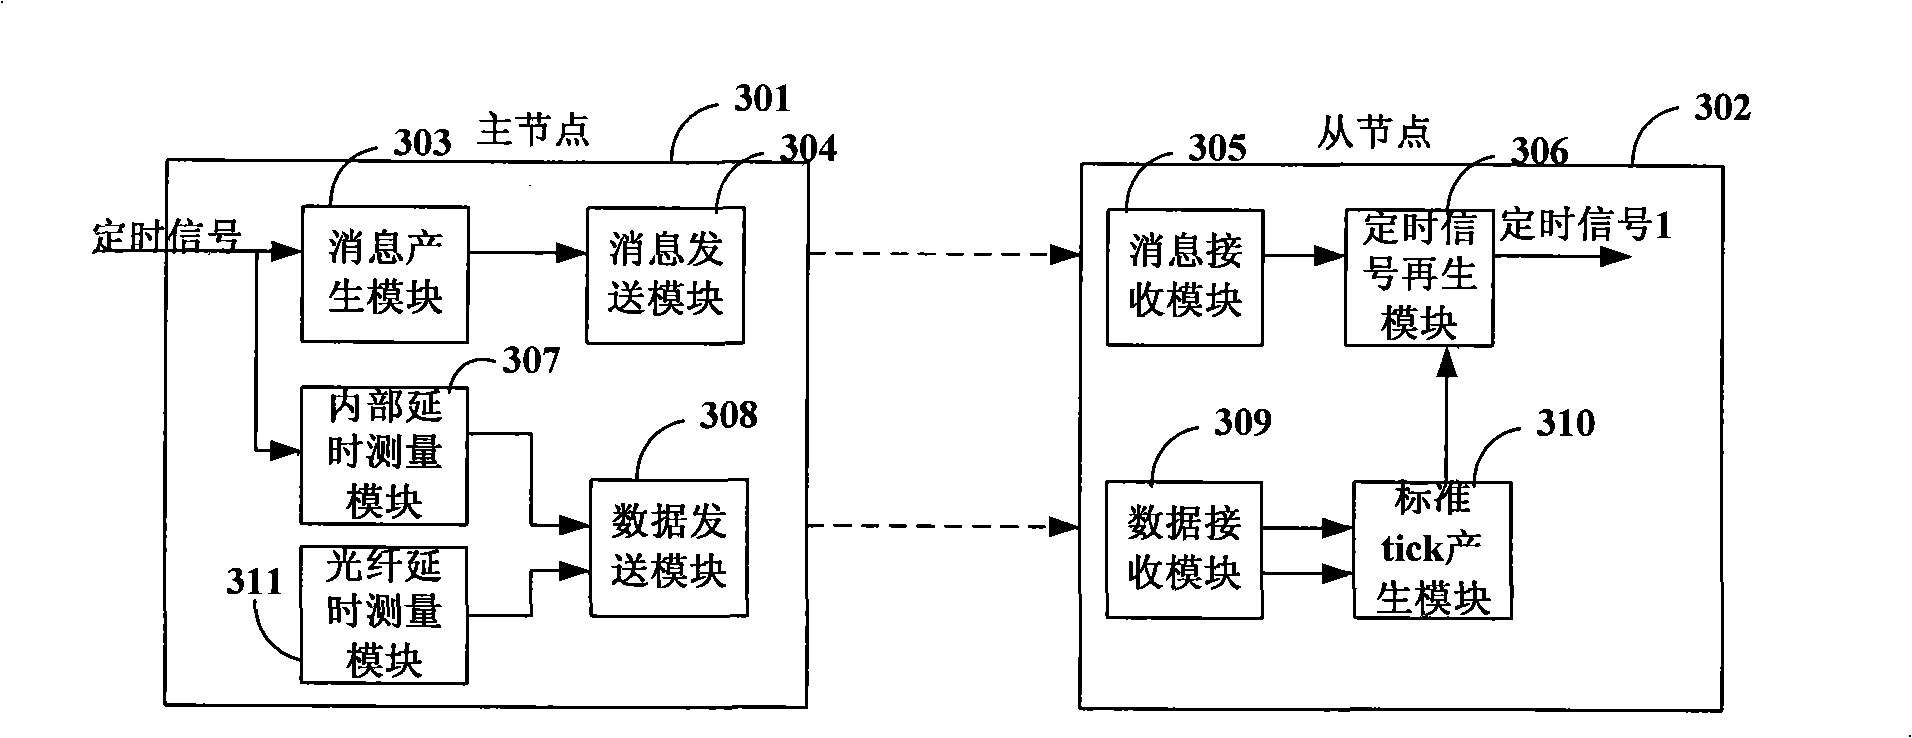 Timing signal transmitting method and system based on OBSAI protocol